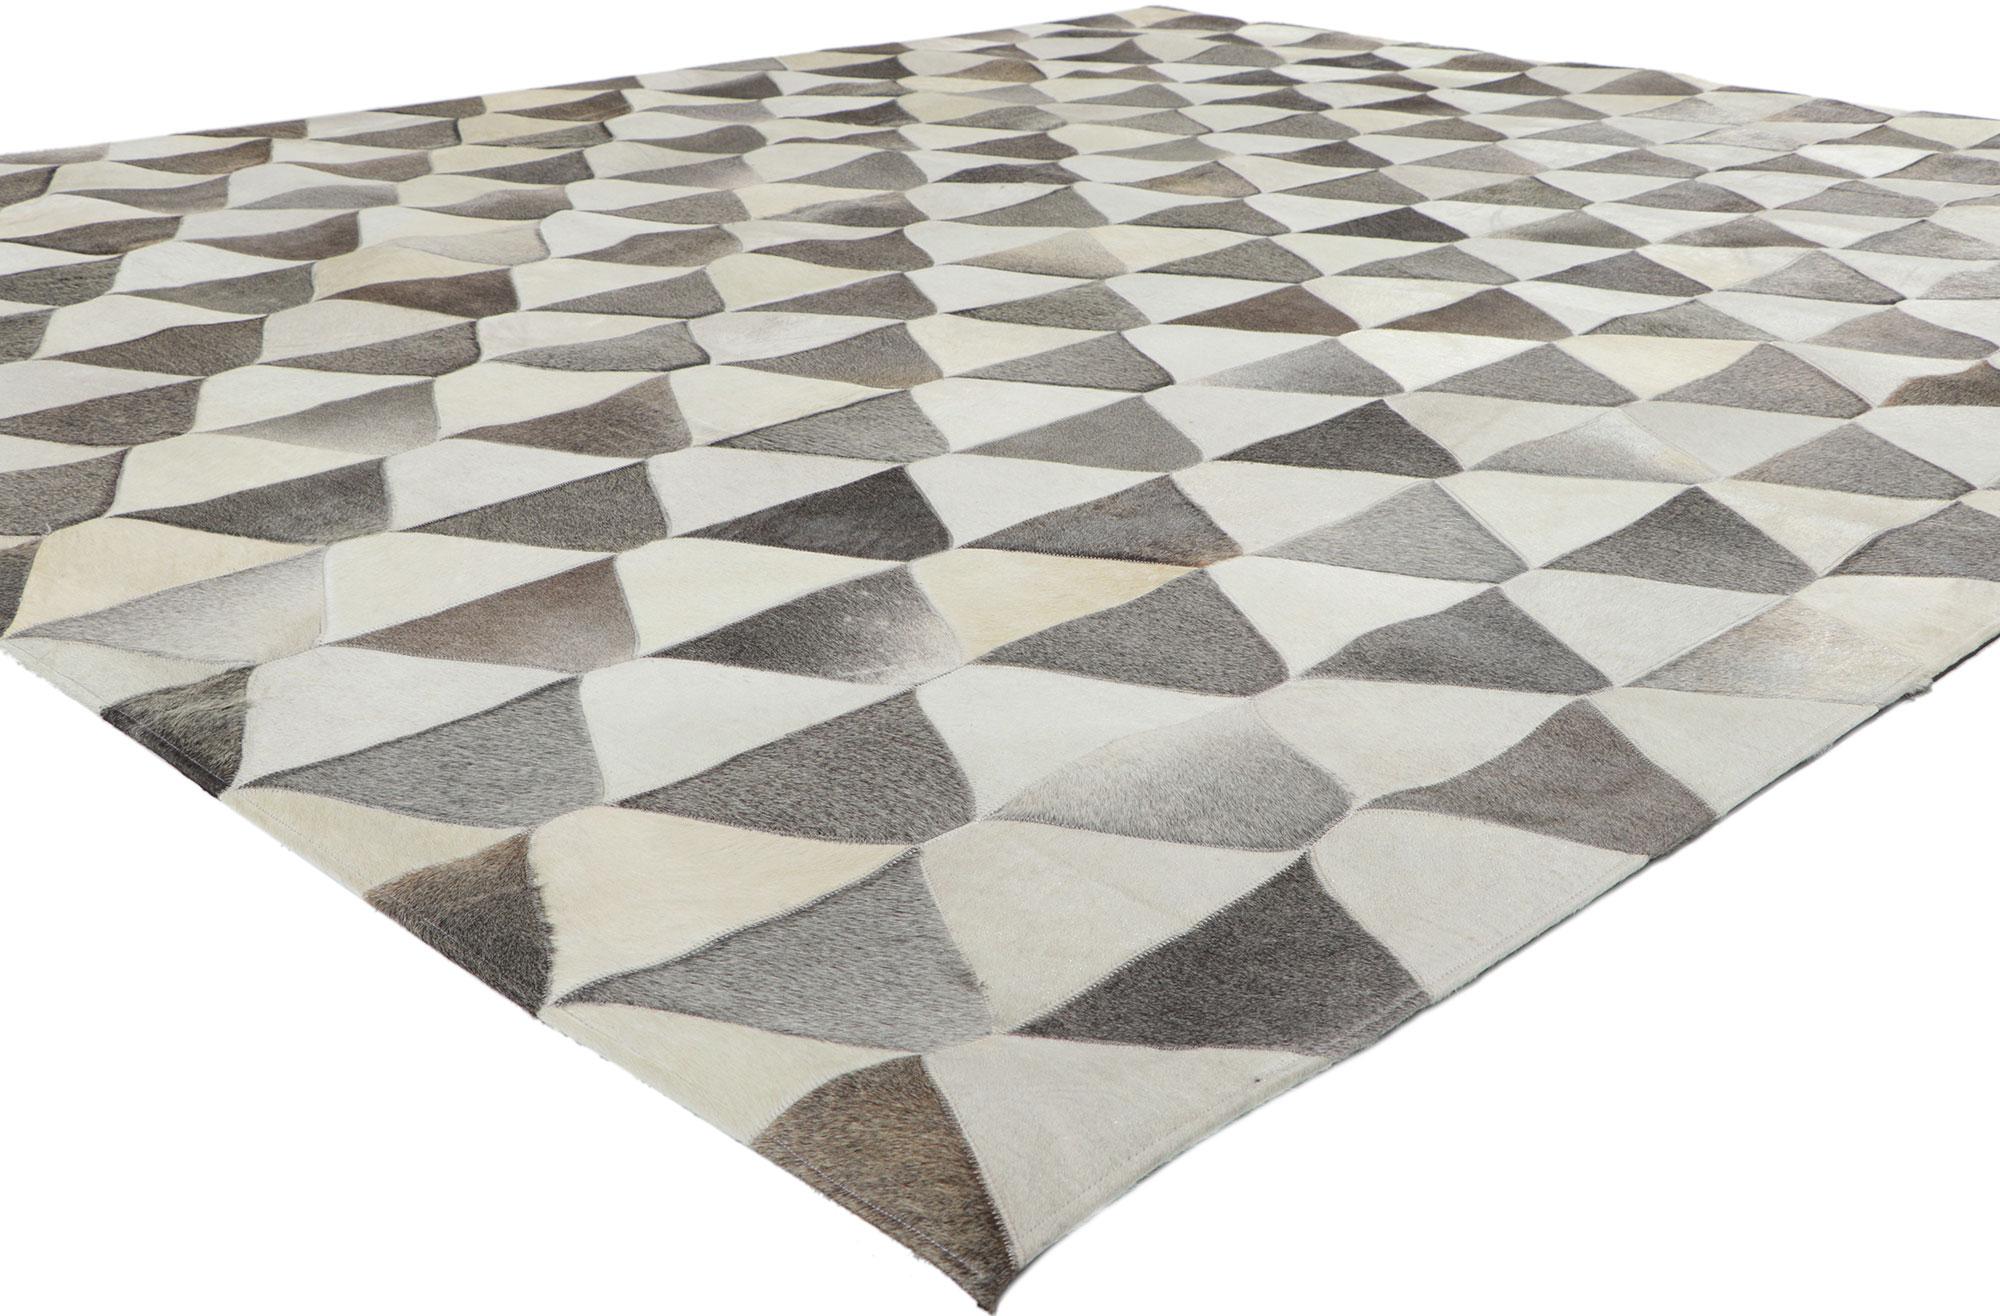 30911 New Contemporary Patchwork Cowhide Rug with Modern Style, 08'02 x 09'11. Call the wild indoors and bring a sense of adventure home with this handcrafted cowhide rug. Showcasing a modern design, incredible detail and texture, this leather